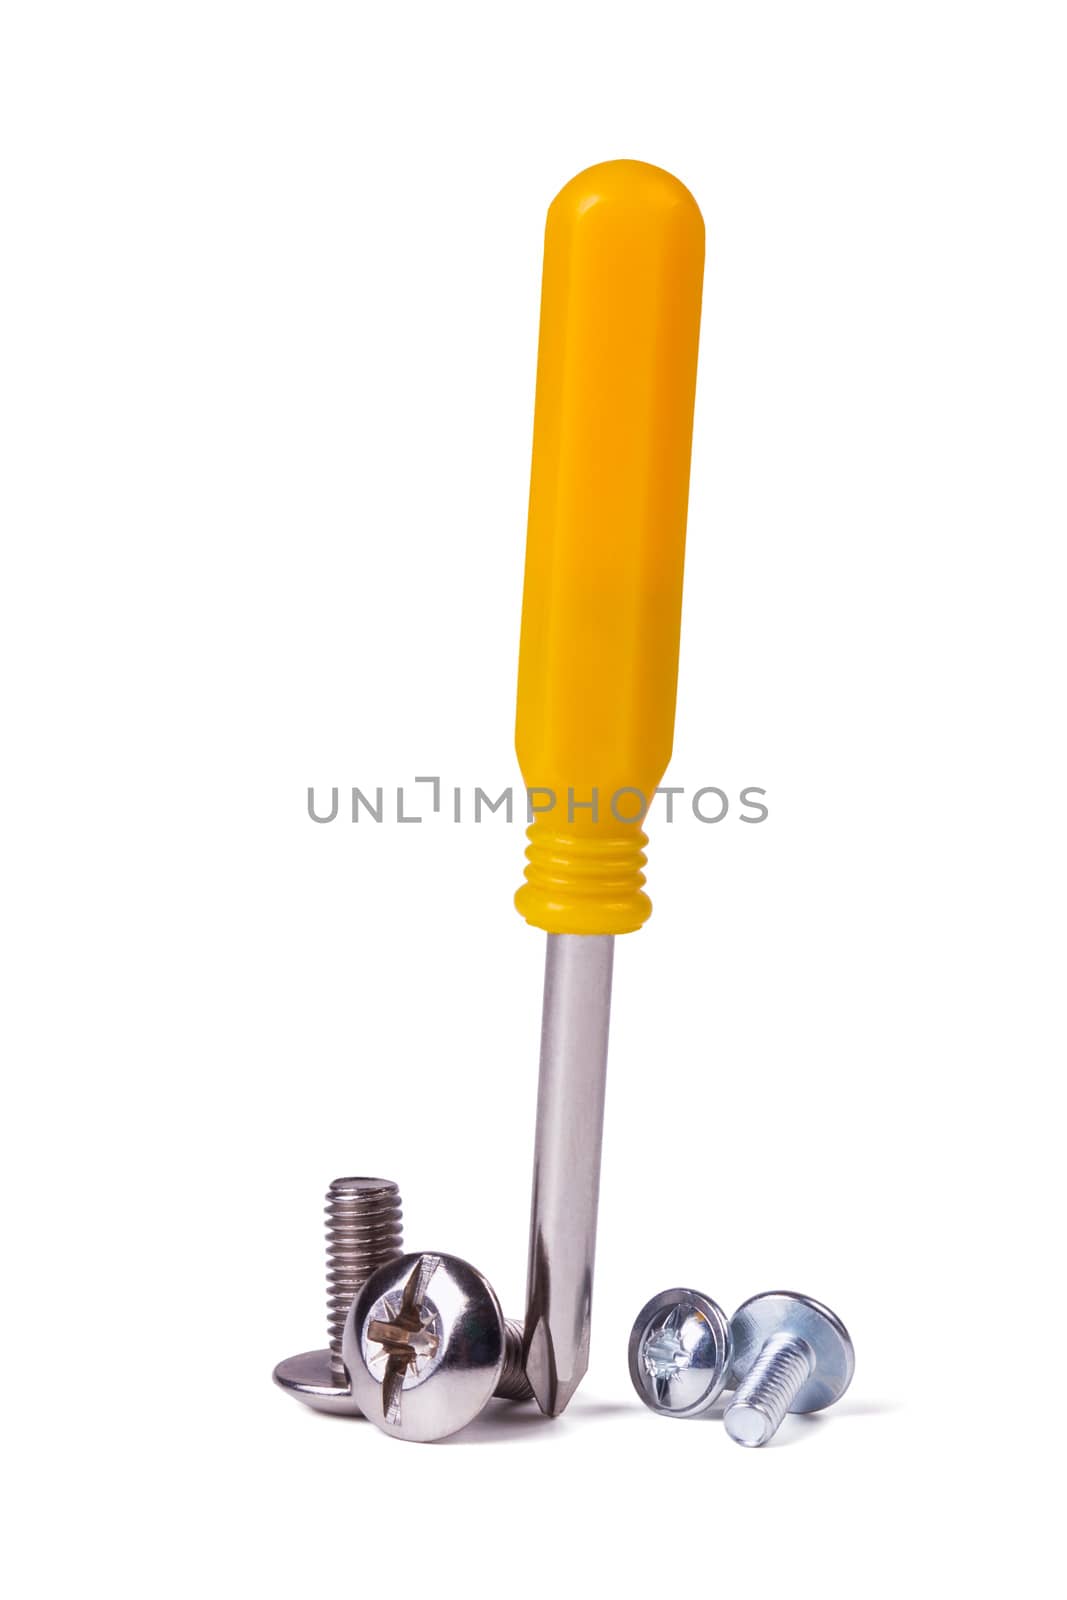 Phillips screwdriver with a yellow handle, screws and bolts on a white background